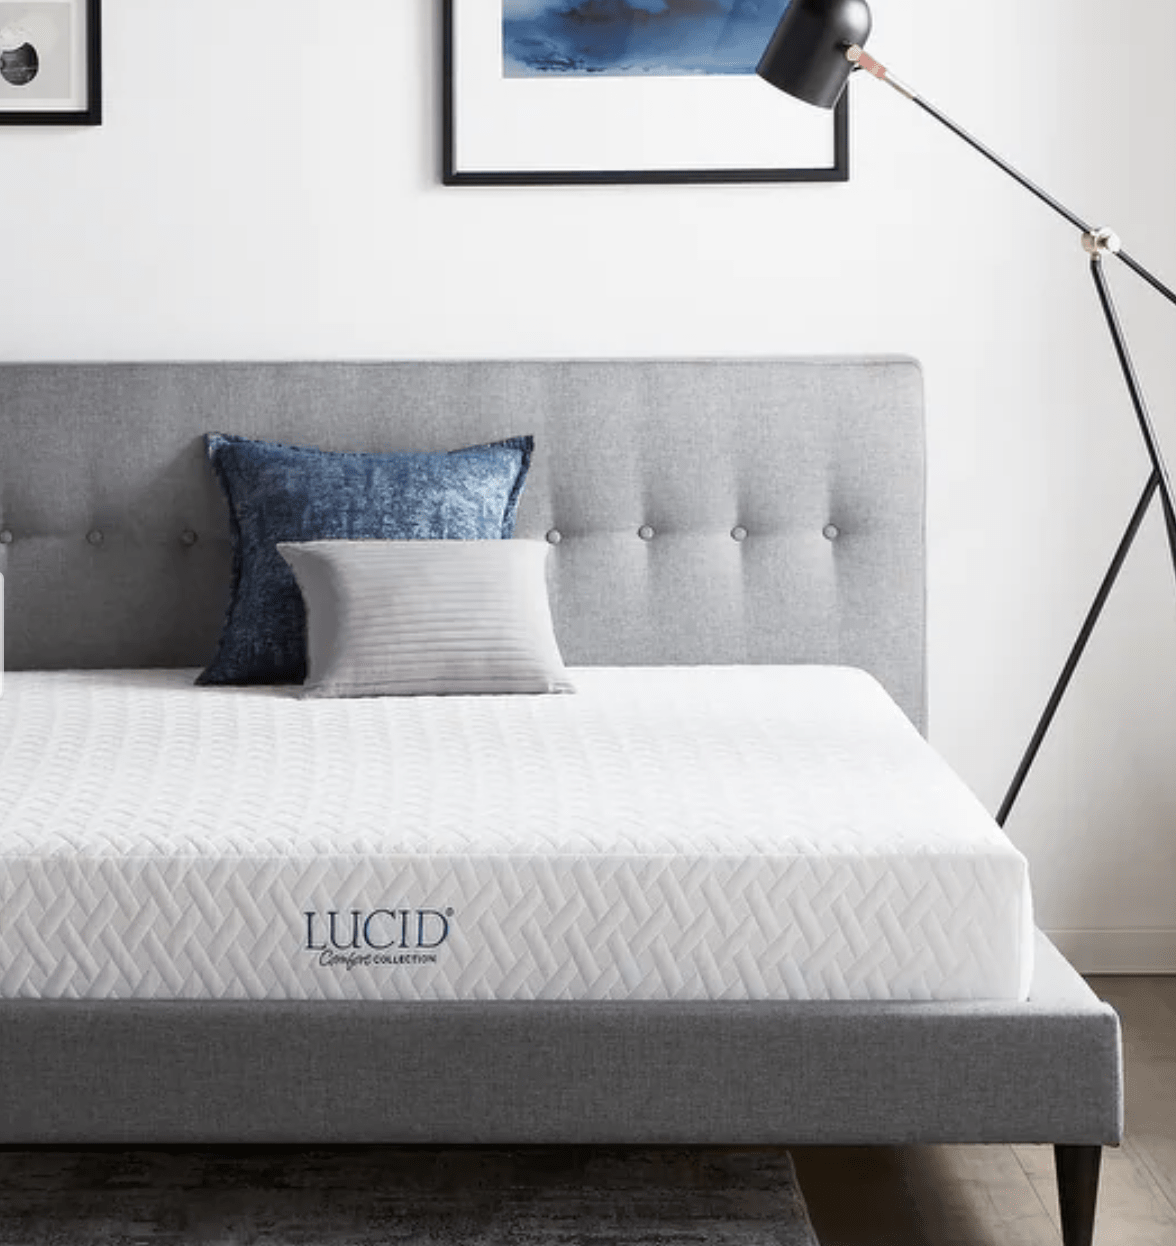 Bed Bath & Beyond on X: Overstock's Presidents Day Clearance is HEREl 💥  Shop huge savings on rugs, living room furniture, mattresses, & more + Free  Shipping on EVERYTHING!*:  #sale #homedecor